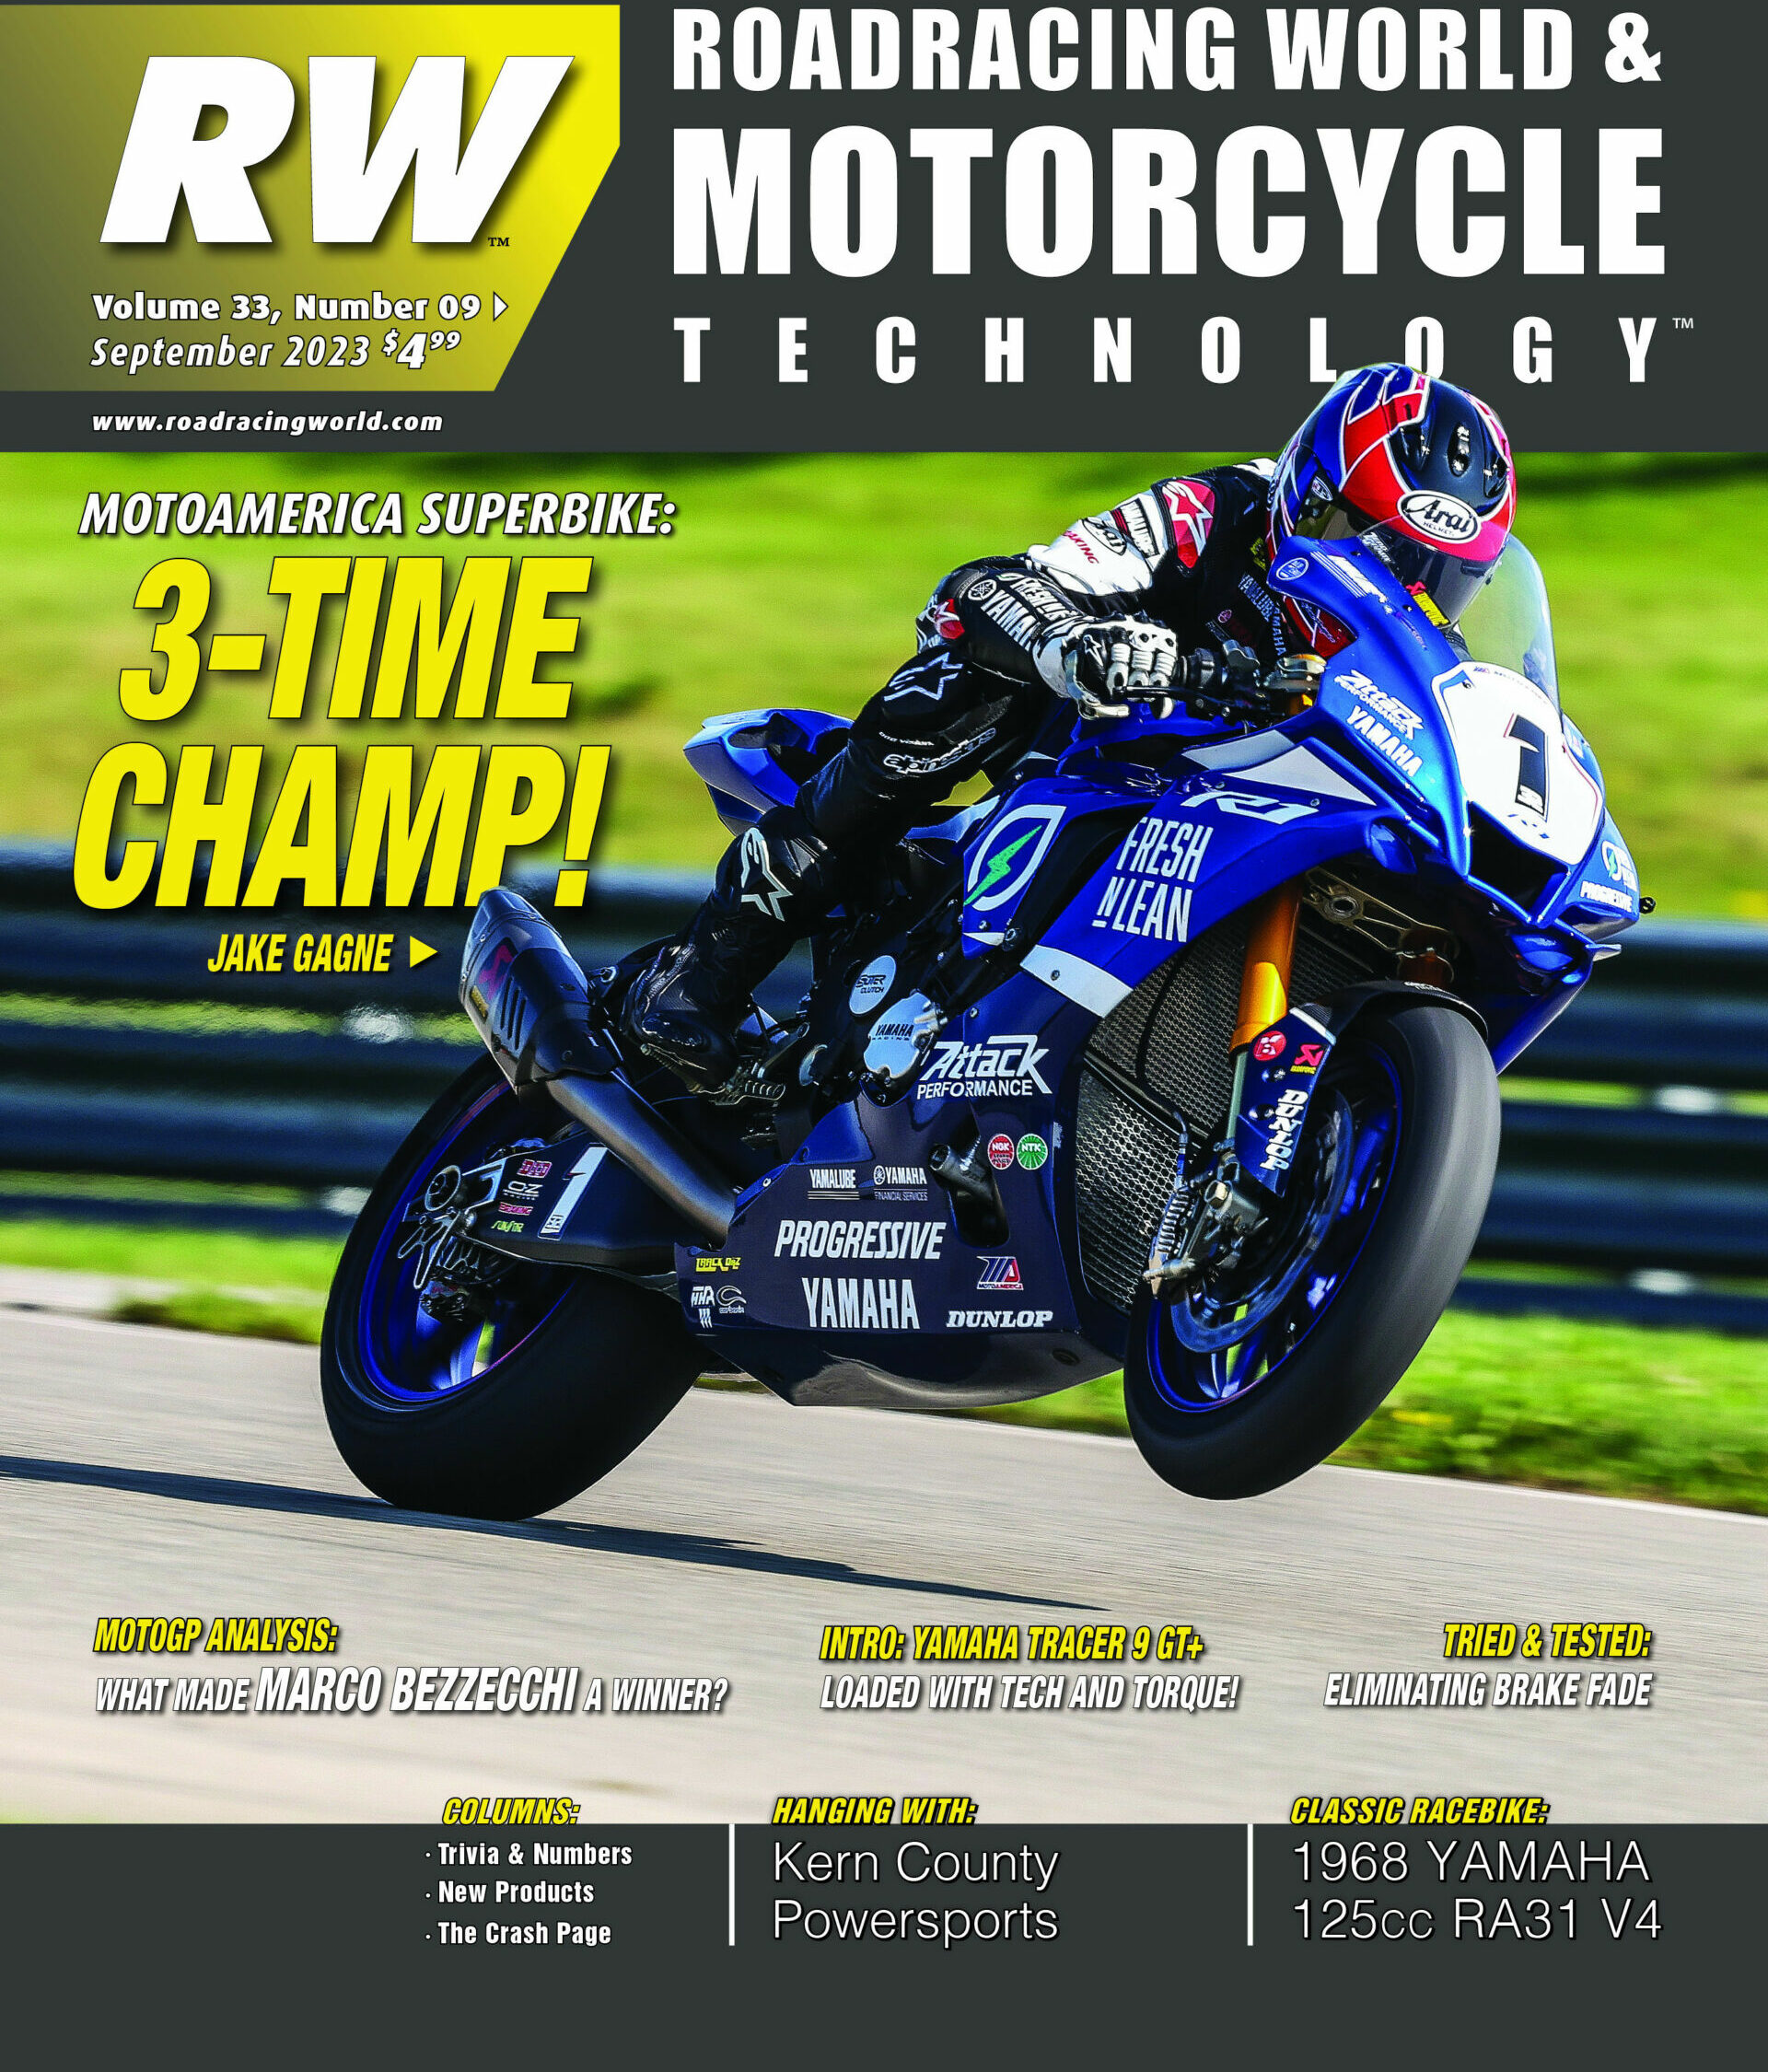 The cover of the September 2023 issue of Roadracing World & Motorcycle Technology magazine. Cover photo by Brian J. Nelson.